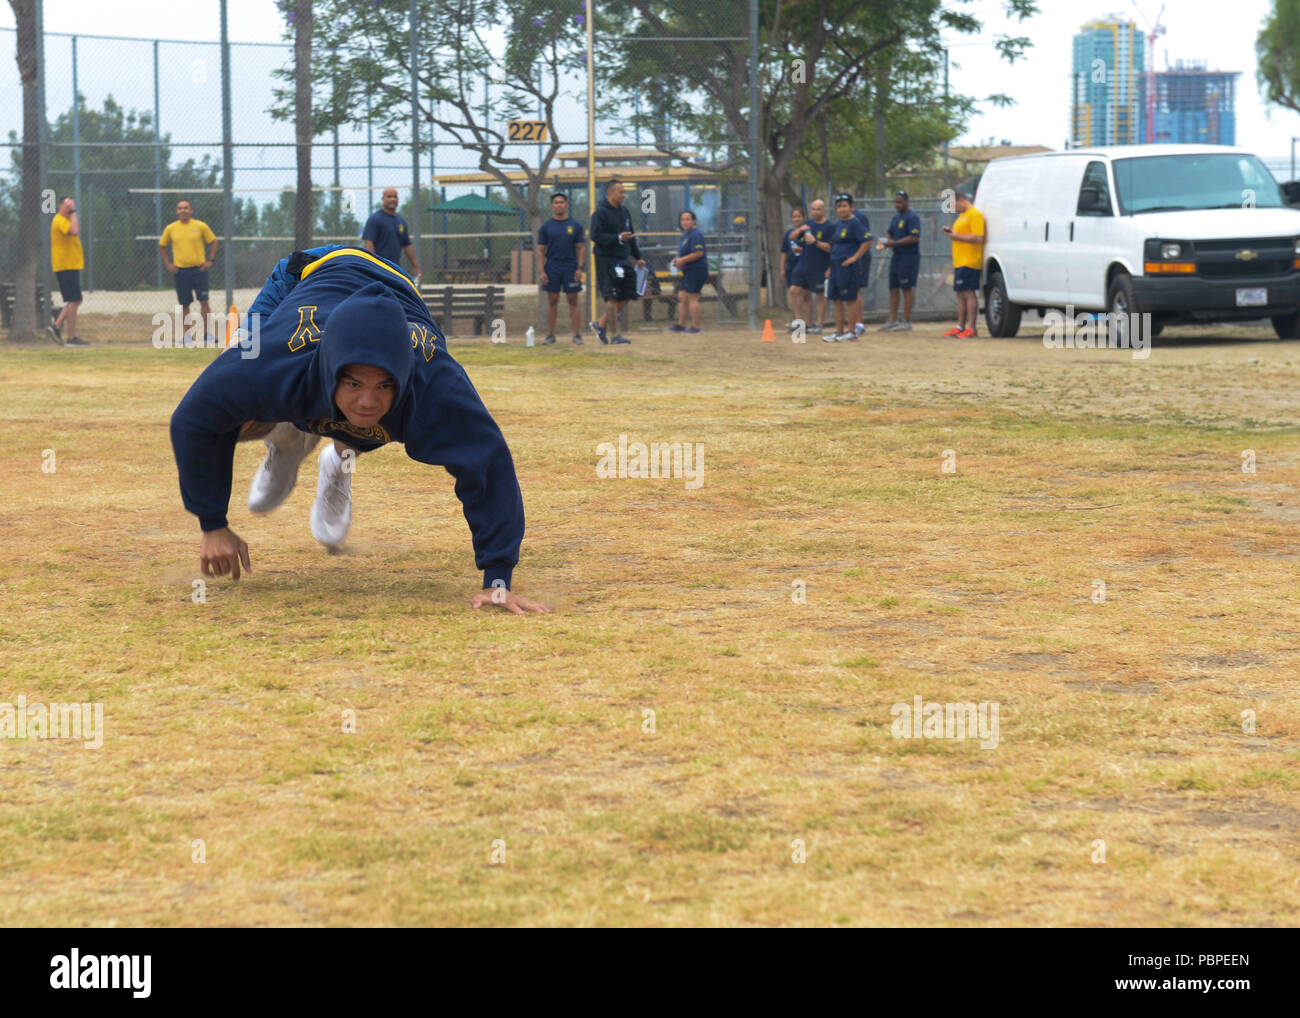 180720-N-PN275-1143 SAN DIEGO (July 20, 2018) Hospital Corpsman 3rd Class Alesandro Cabais preforms the bear crawl for an obstacle course in Naval Medical Center San Diego’s Sailor Games to observe the launch of Sailor 360. Sailor 360 is the Navy’s new leadership training curriculum, which is designed to provide meaningful training to Sailors of all ranks. (U.S. Navy Photo by Mass Communication Specialist 2nd Class Zach Kreitzer) Stock Photo